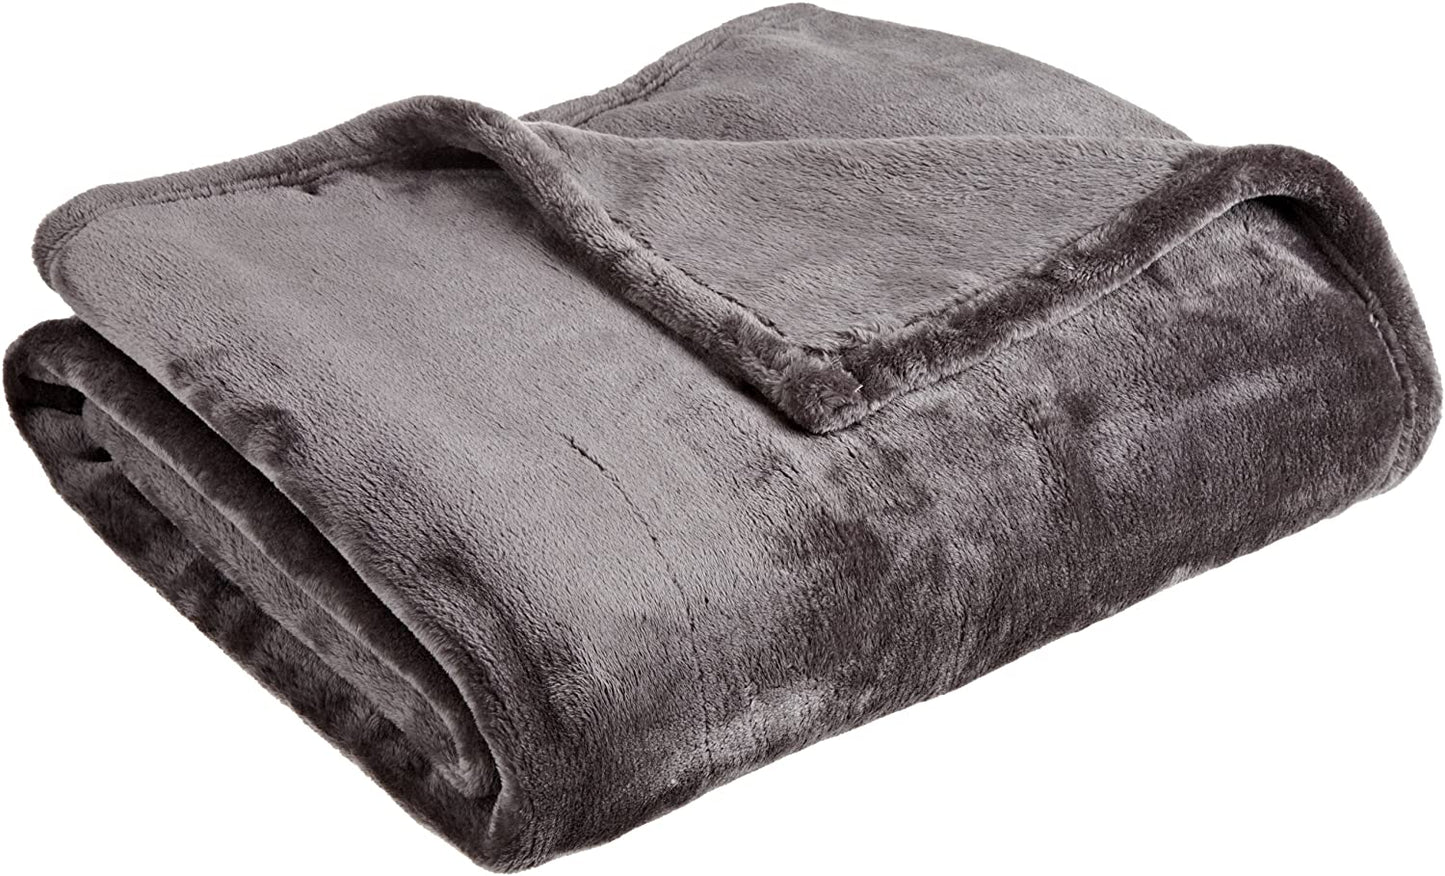 Thesis Cashmere Plush Throw - Charcoal